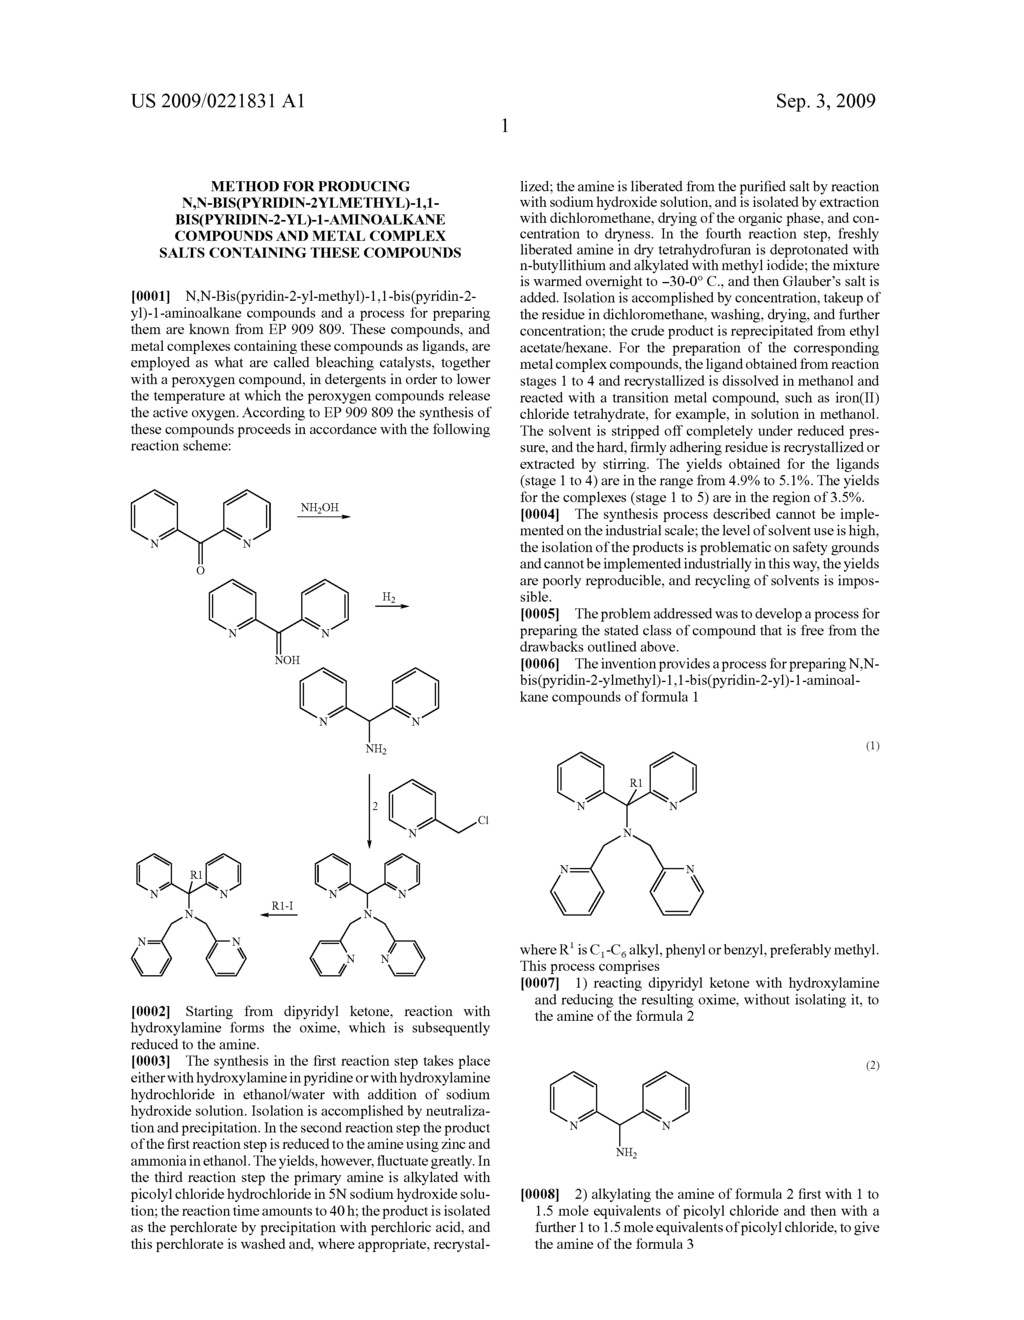 Method for Producing N,N-Bis(Pyridin-2Ylmethyl)-1,1-Bis(Pyridin-2-Yl)-1-Aminoalkane Compounds and Metal Complex Salts Containing These Compounds - diagram, schematic, and image 02